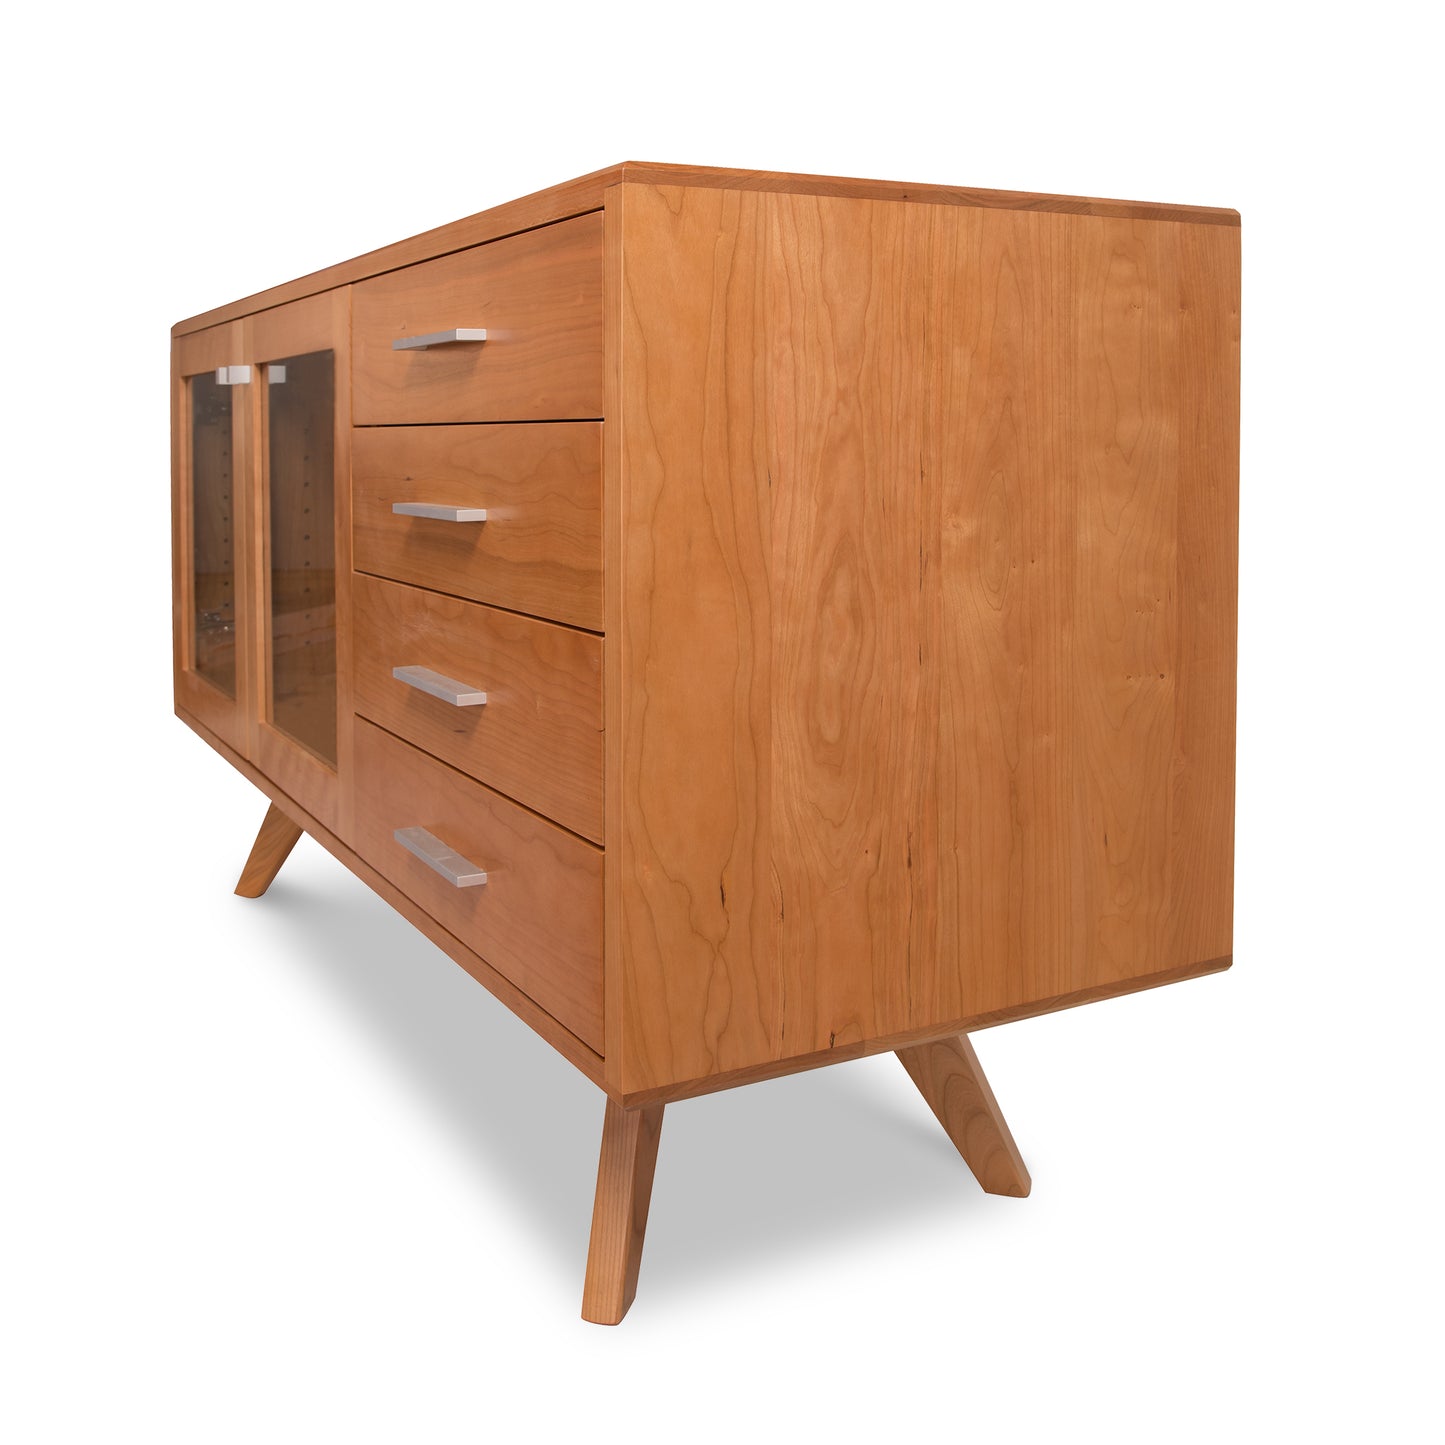 The Lyndon Furniture Brighton Buffet is a mid-century modern wooden sideboard featuring glass doors and elegant legs. With its ample storage space, this stunning piece provides both functionality and style to elevate any living area.